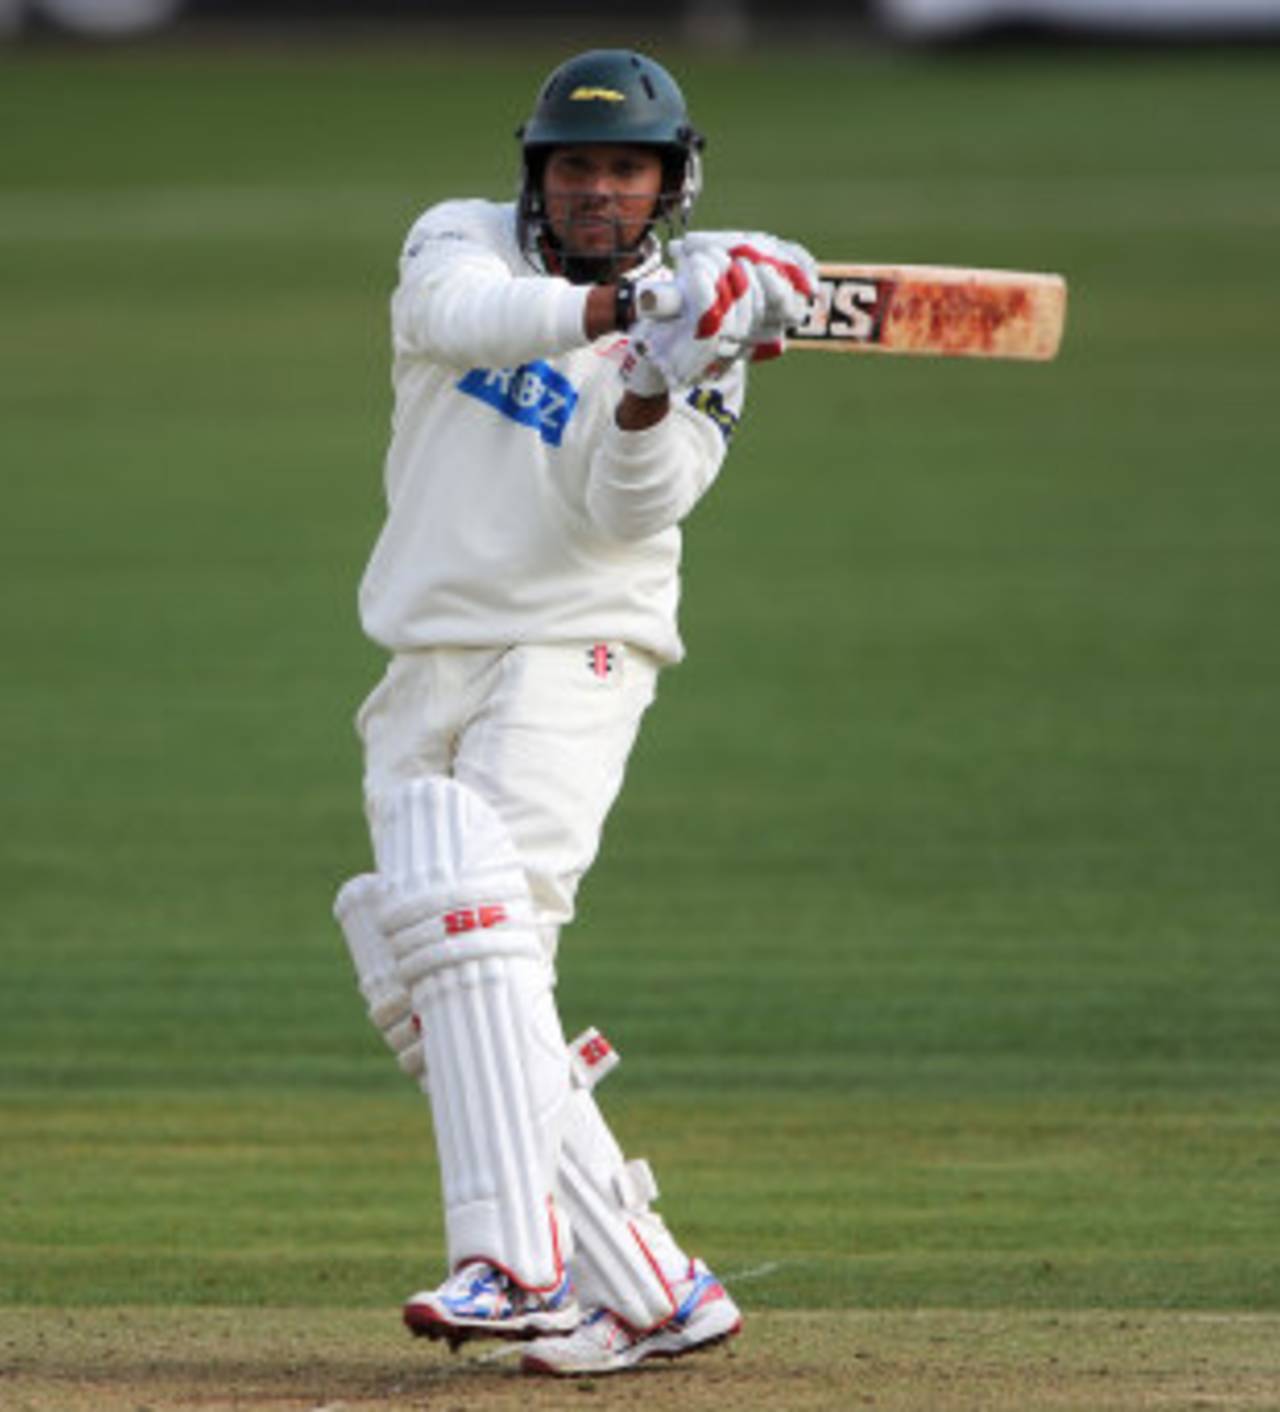 Ramnaresh Sarwan hooks on his way to 41, Leicestershire v Glamorgan, County Championship, Leicester, Grace Road, 1st day, March 5, 2012